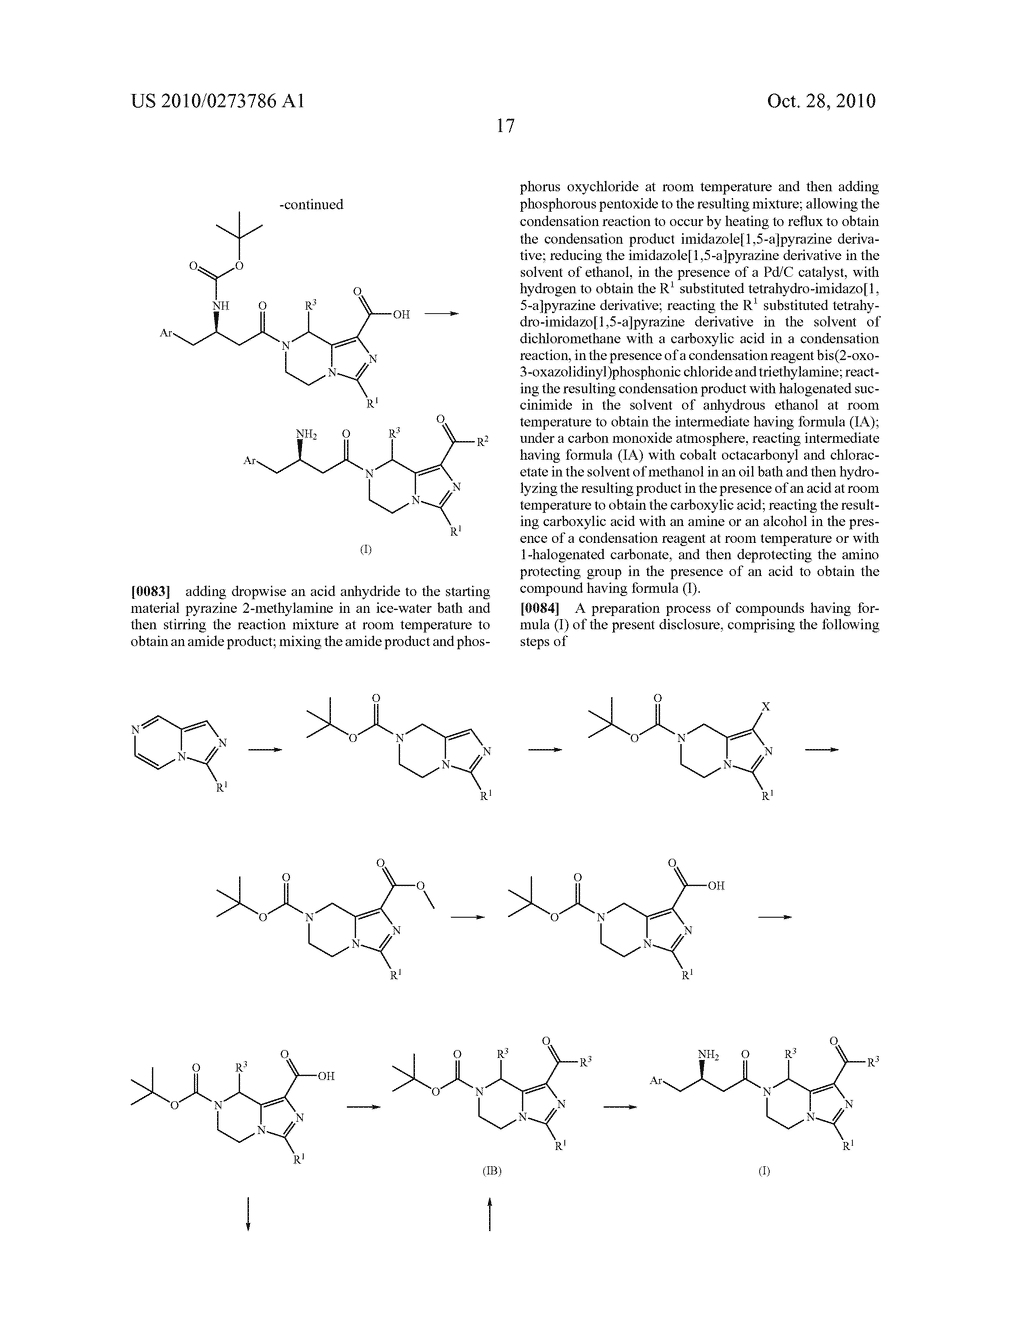 TETRAHYDRO-IMIDAZ0[1,5-A]PYRAZINE DERIVATIVES, PREPARATION PROCESS AND MEDICINAL USE THEREOF - diagram, schematic, and image 18